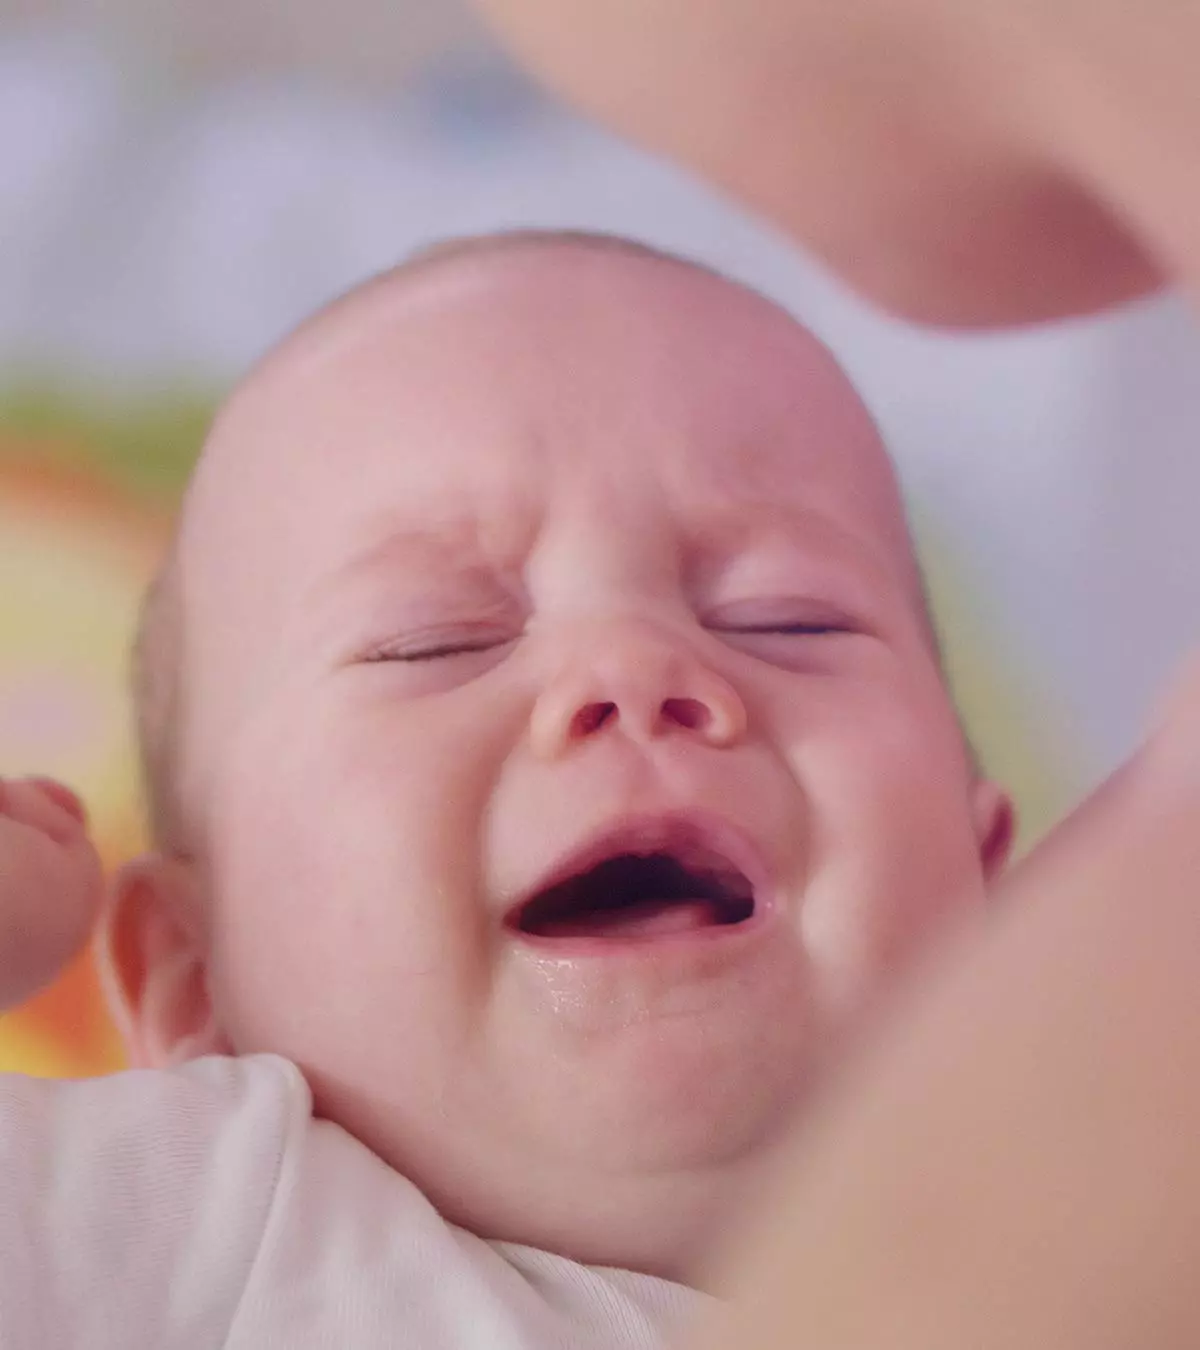 20 Reasons Why Baby Fusses Or Cries While Breastfeeding